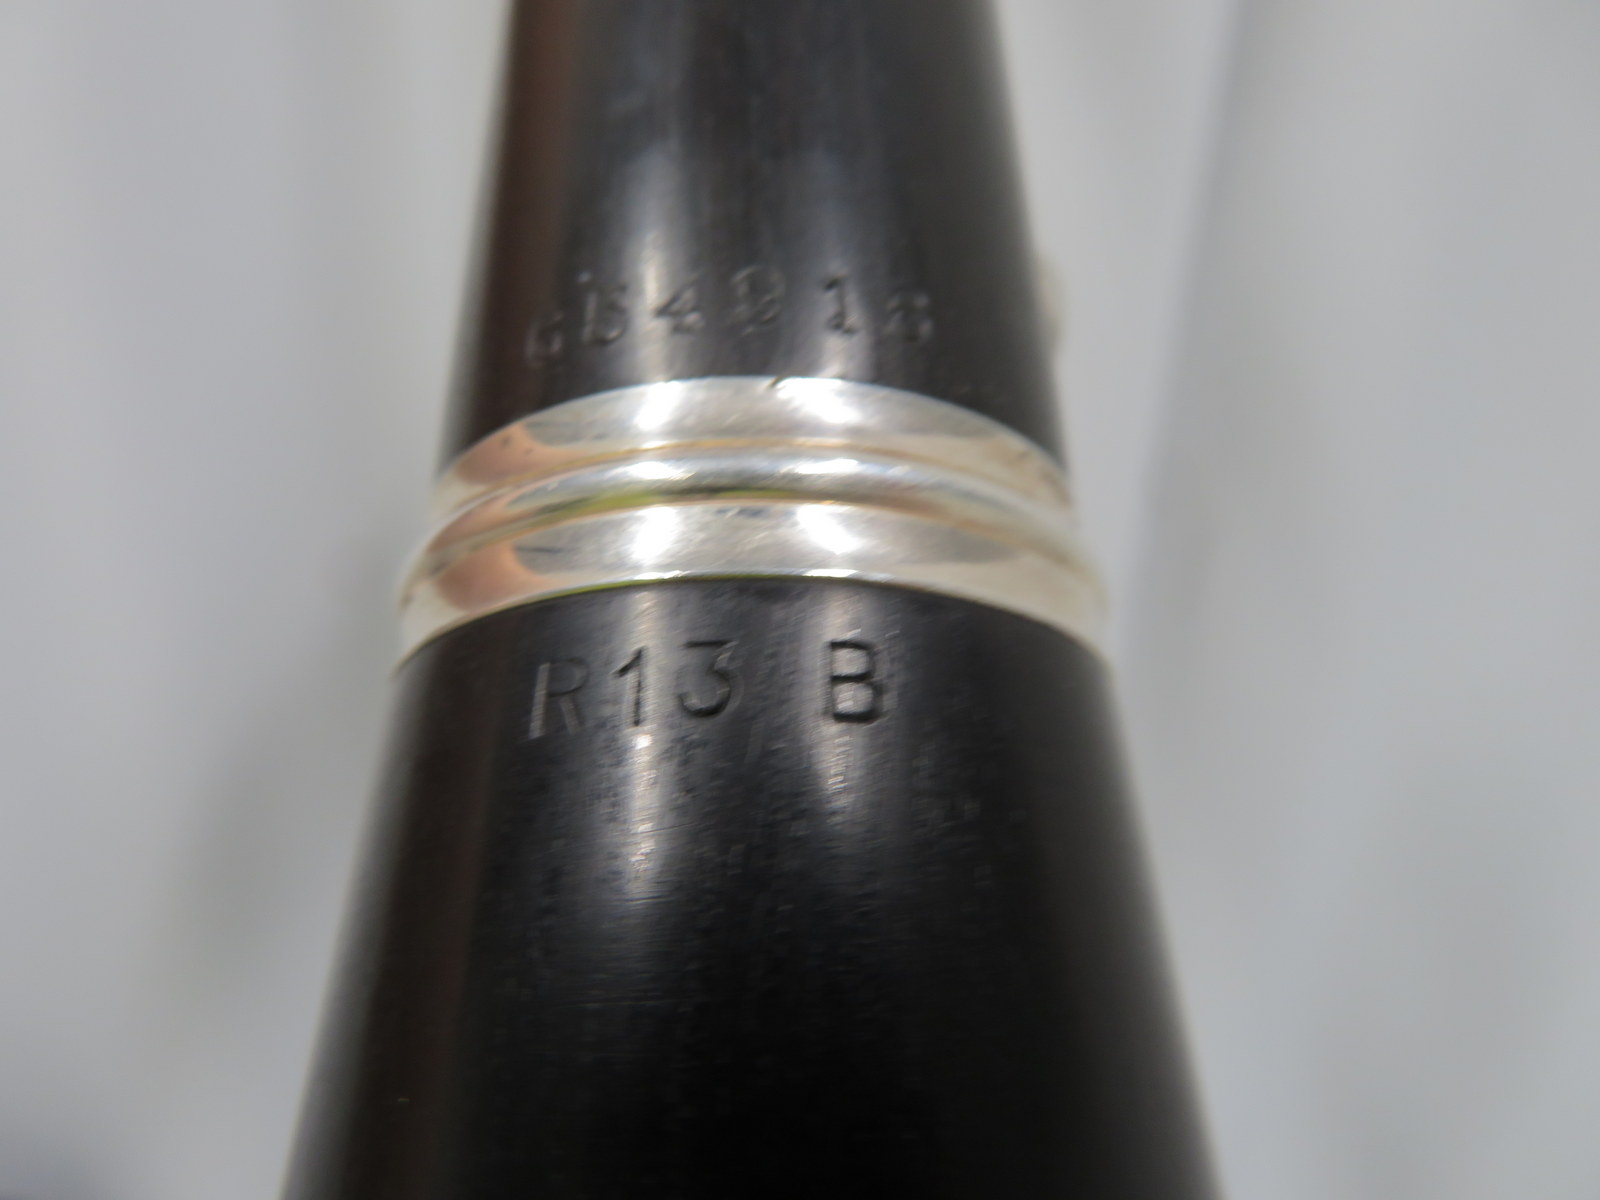 Buffet Crampon R13 clarinet with case. Serial number: 654916. - Image 12 of 18